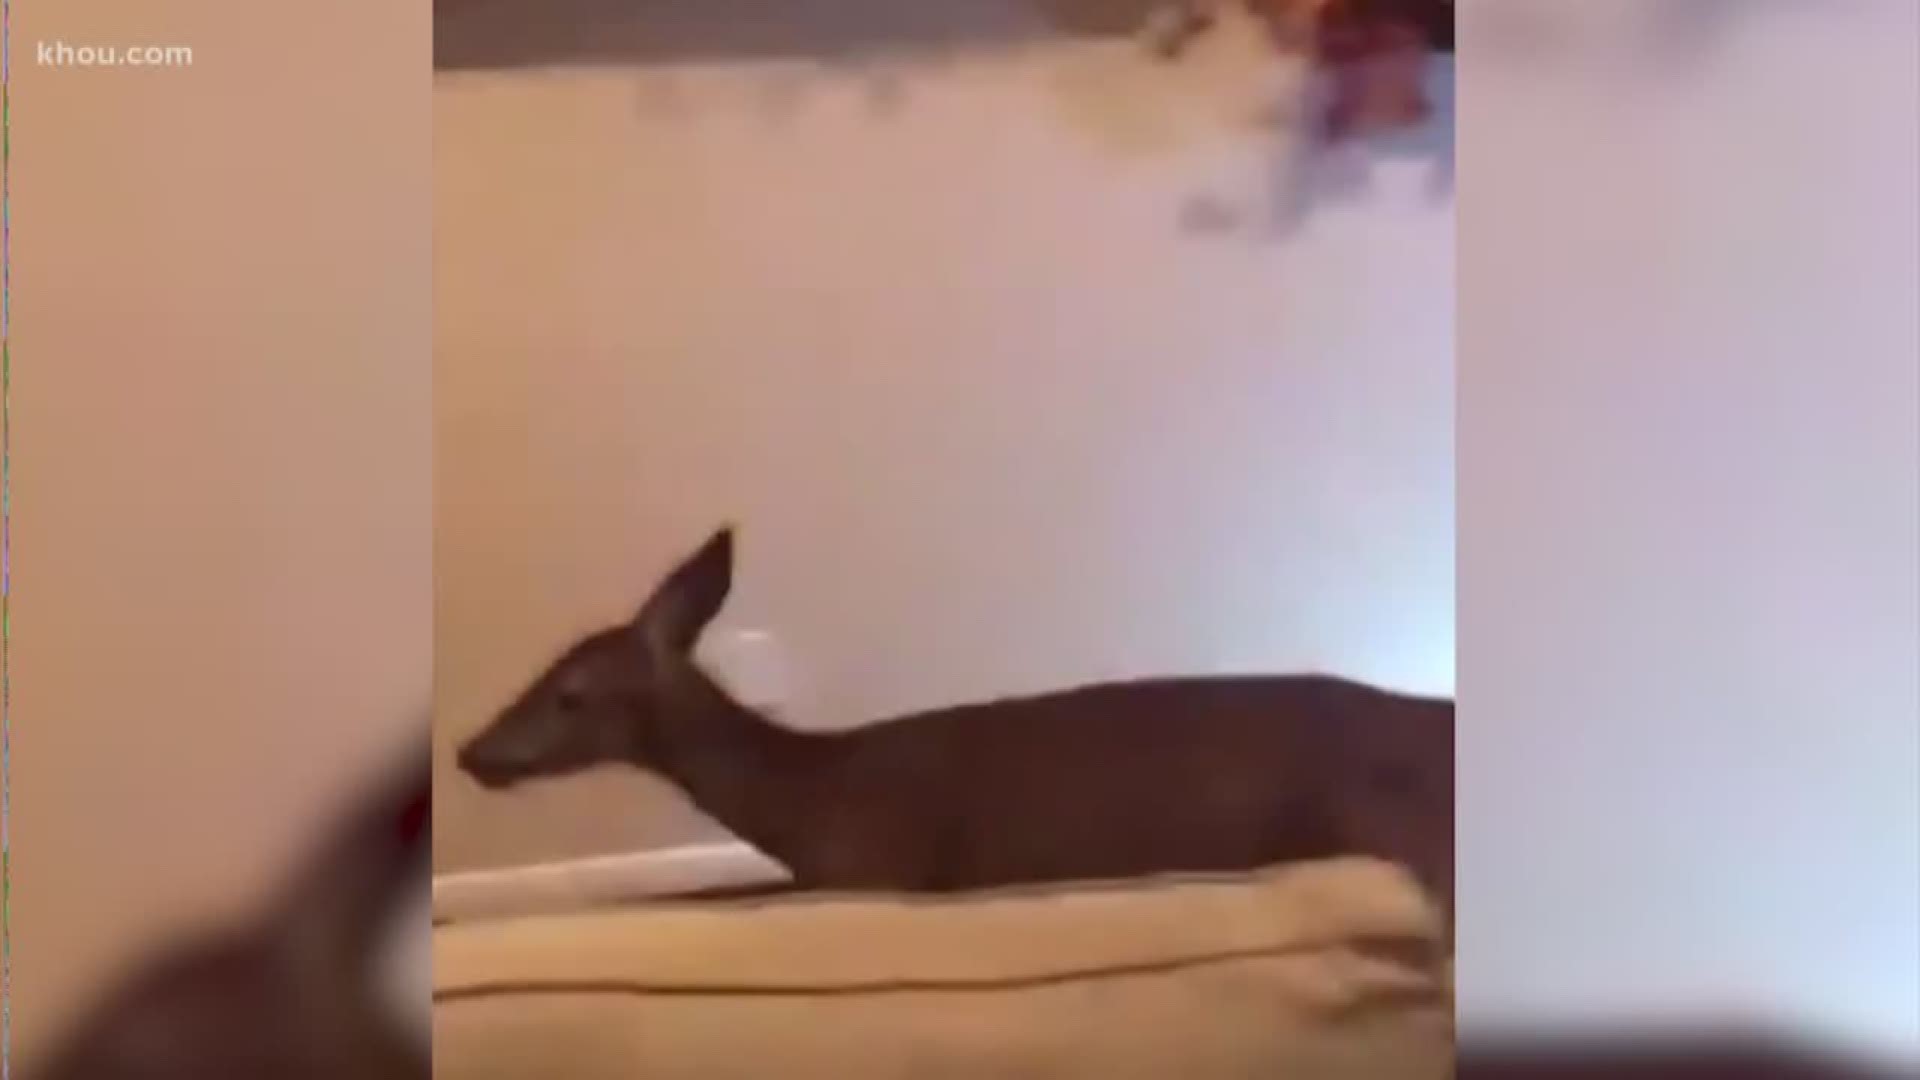 A deer "broke into" a home in Kingwood this week, and the incident was caught on video.